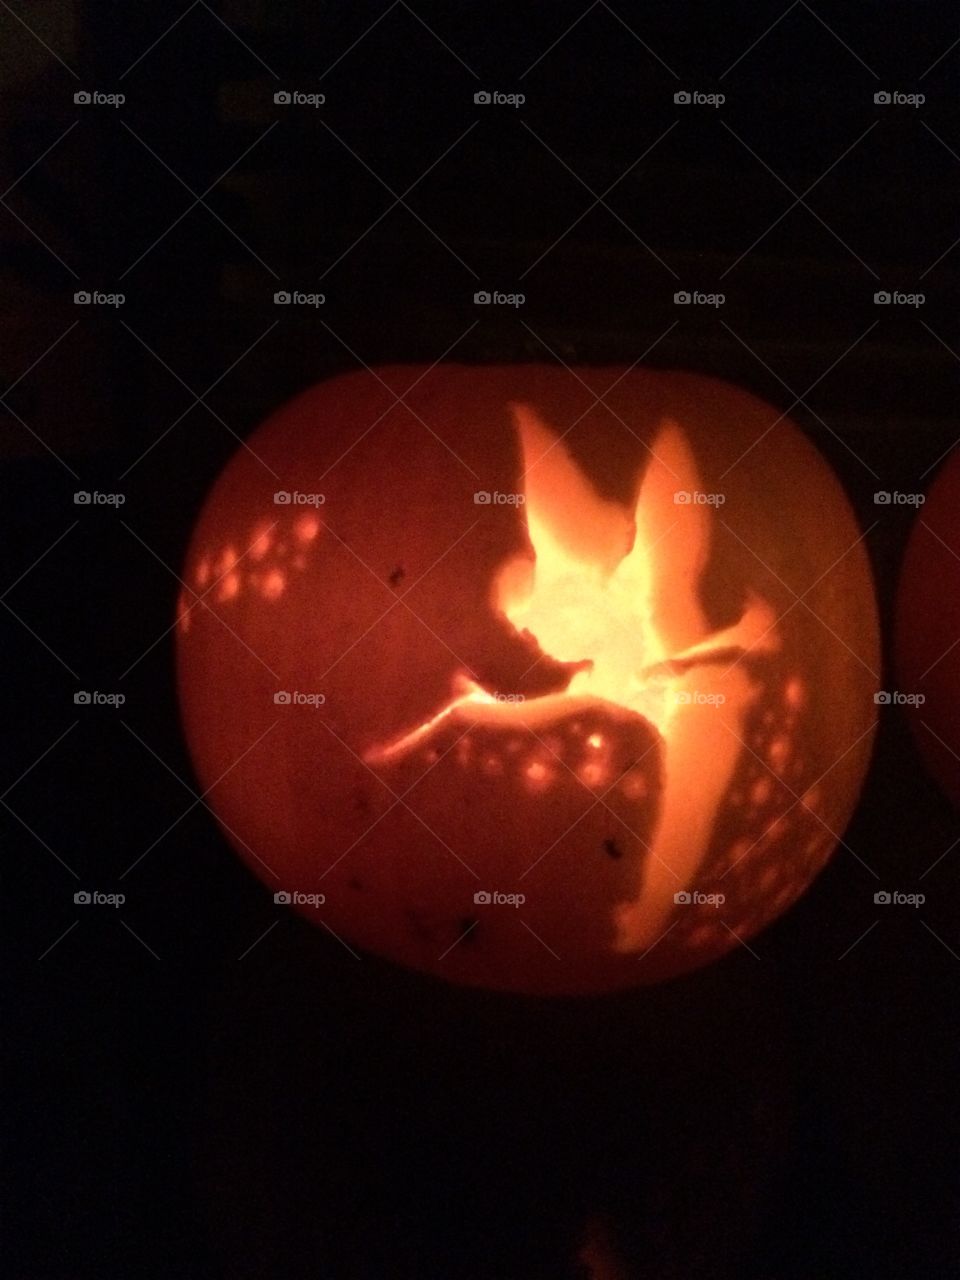 My carved pumpkin from Halloween featuring fairy design. 